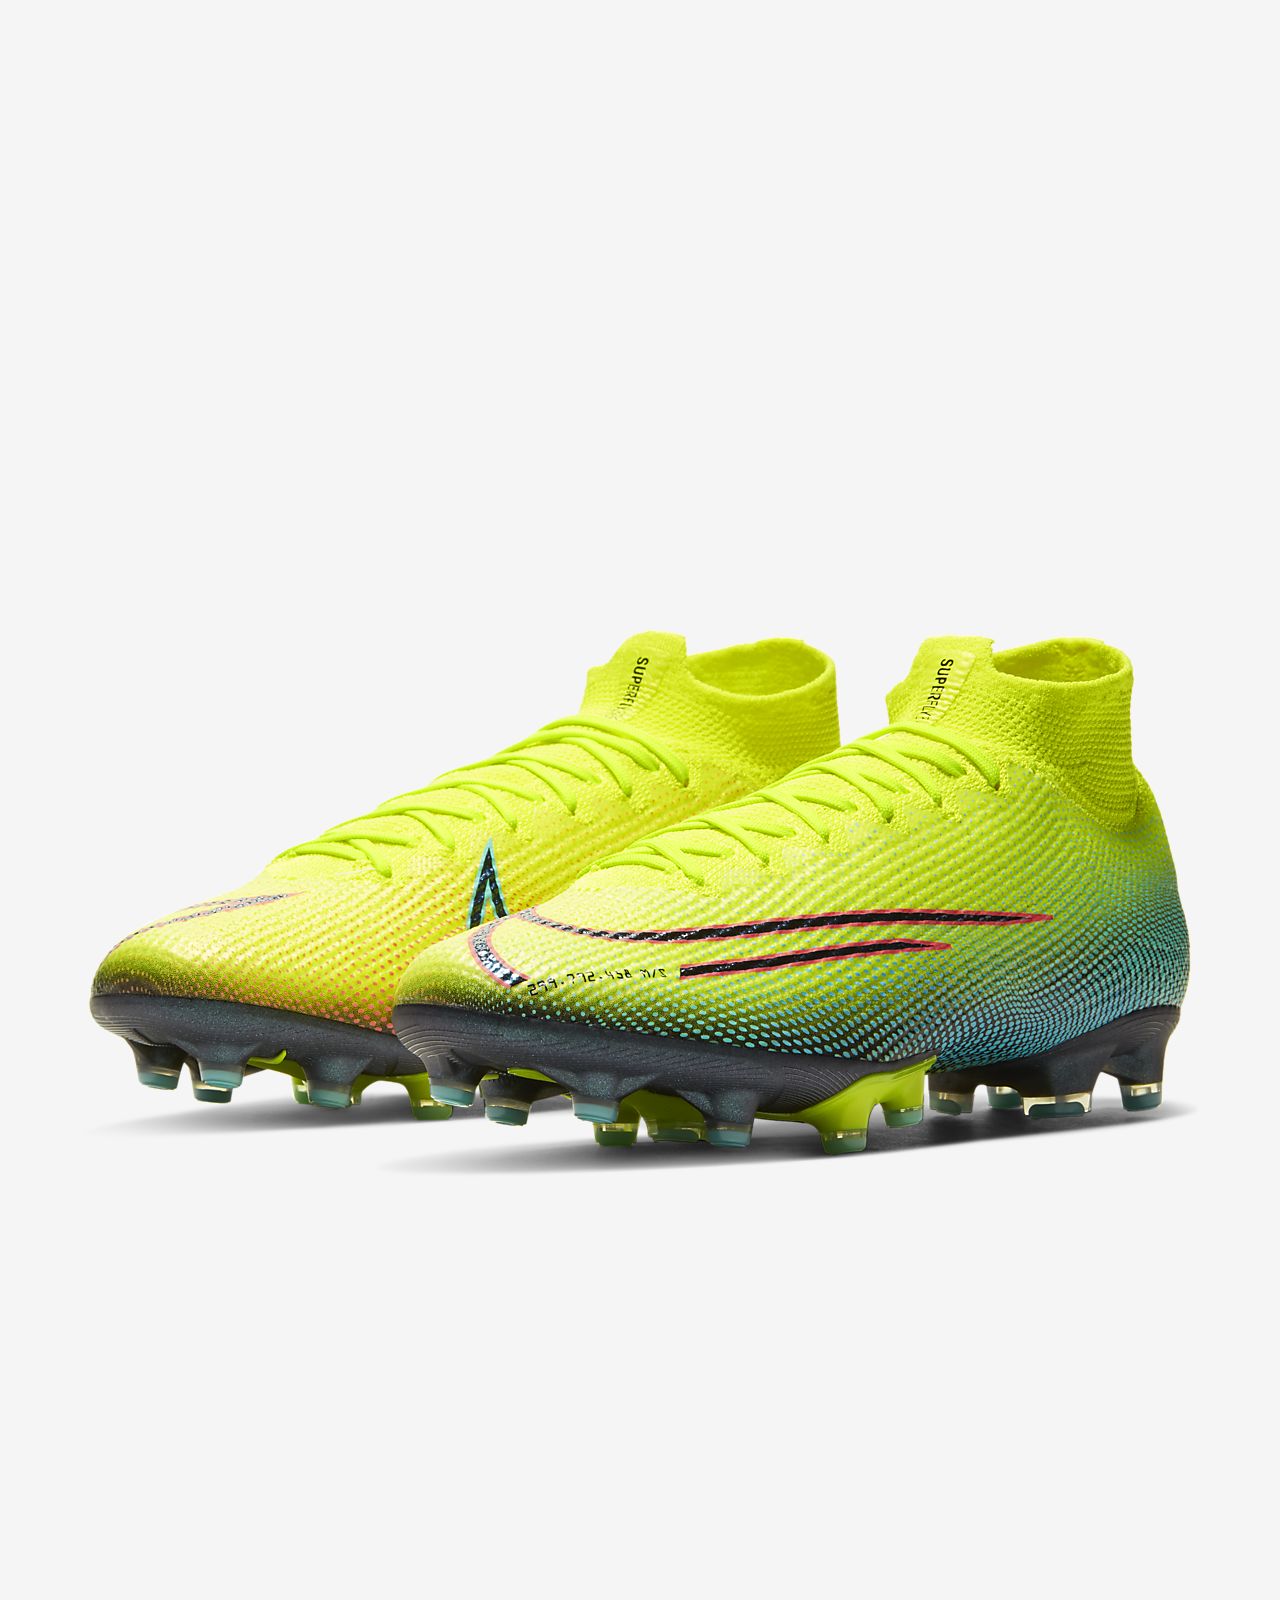 Nike Mercurial Superfly 7 Pro FG AT5382. Teamsport philippines